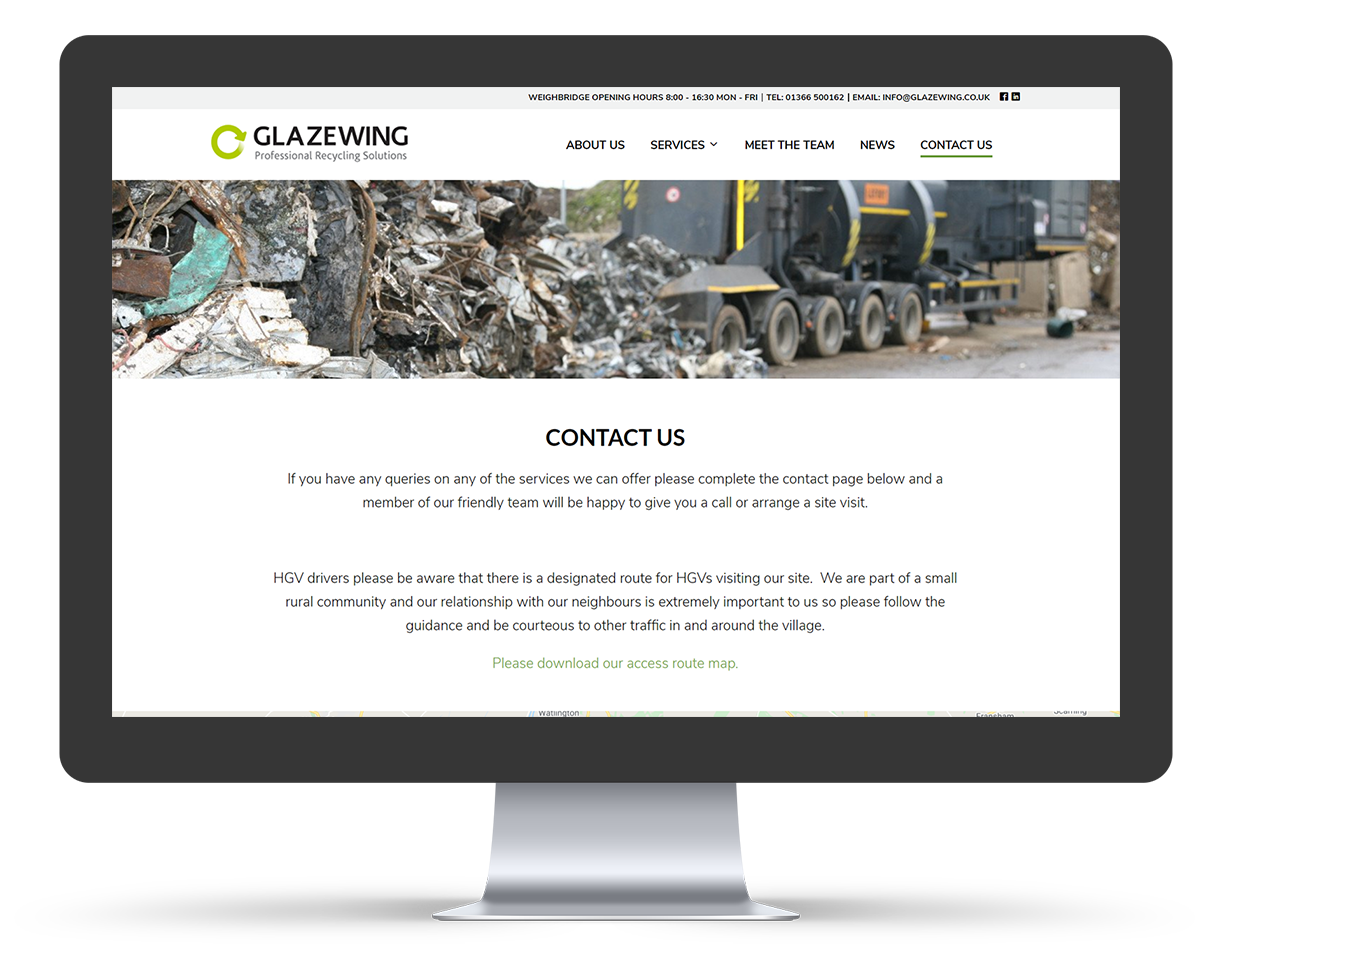 Glazewing Contact Page